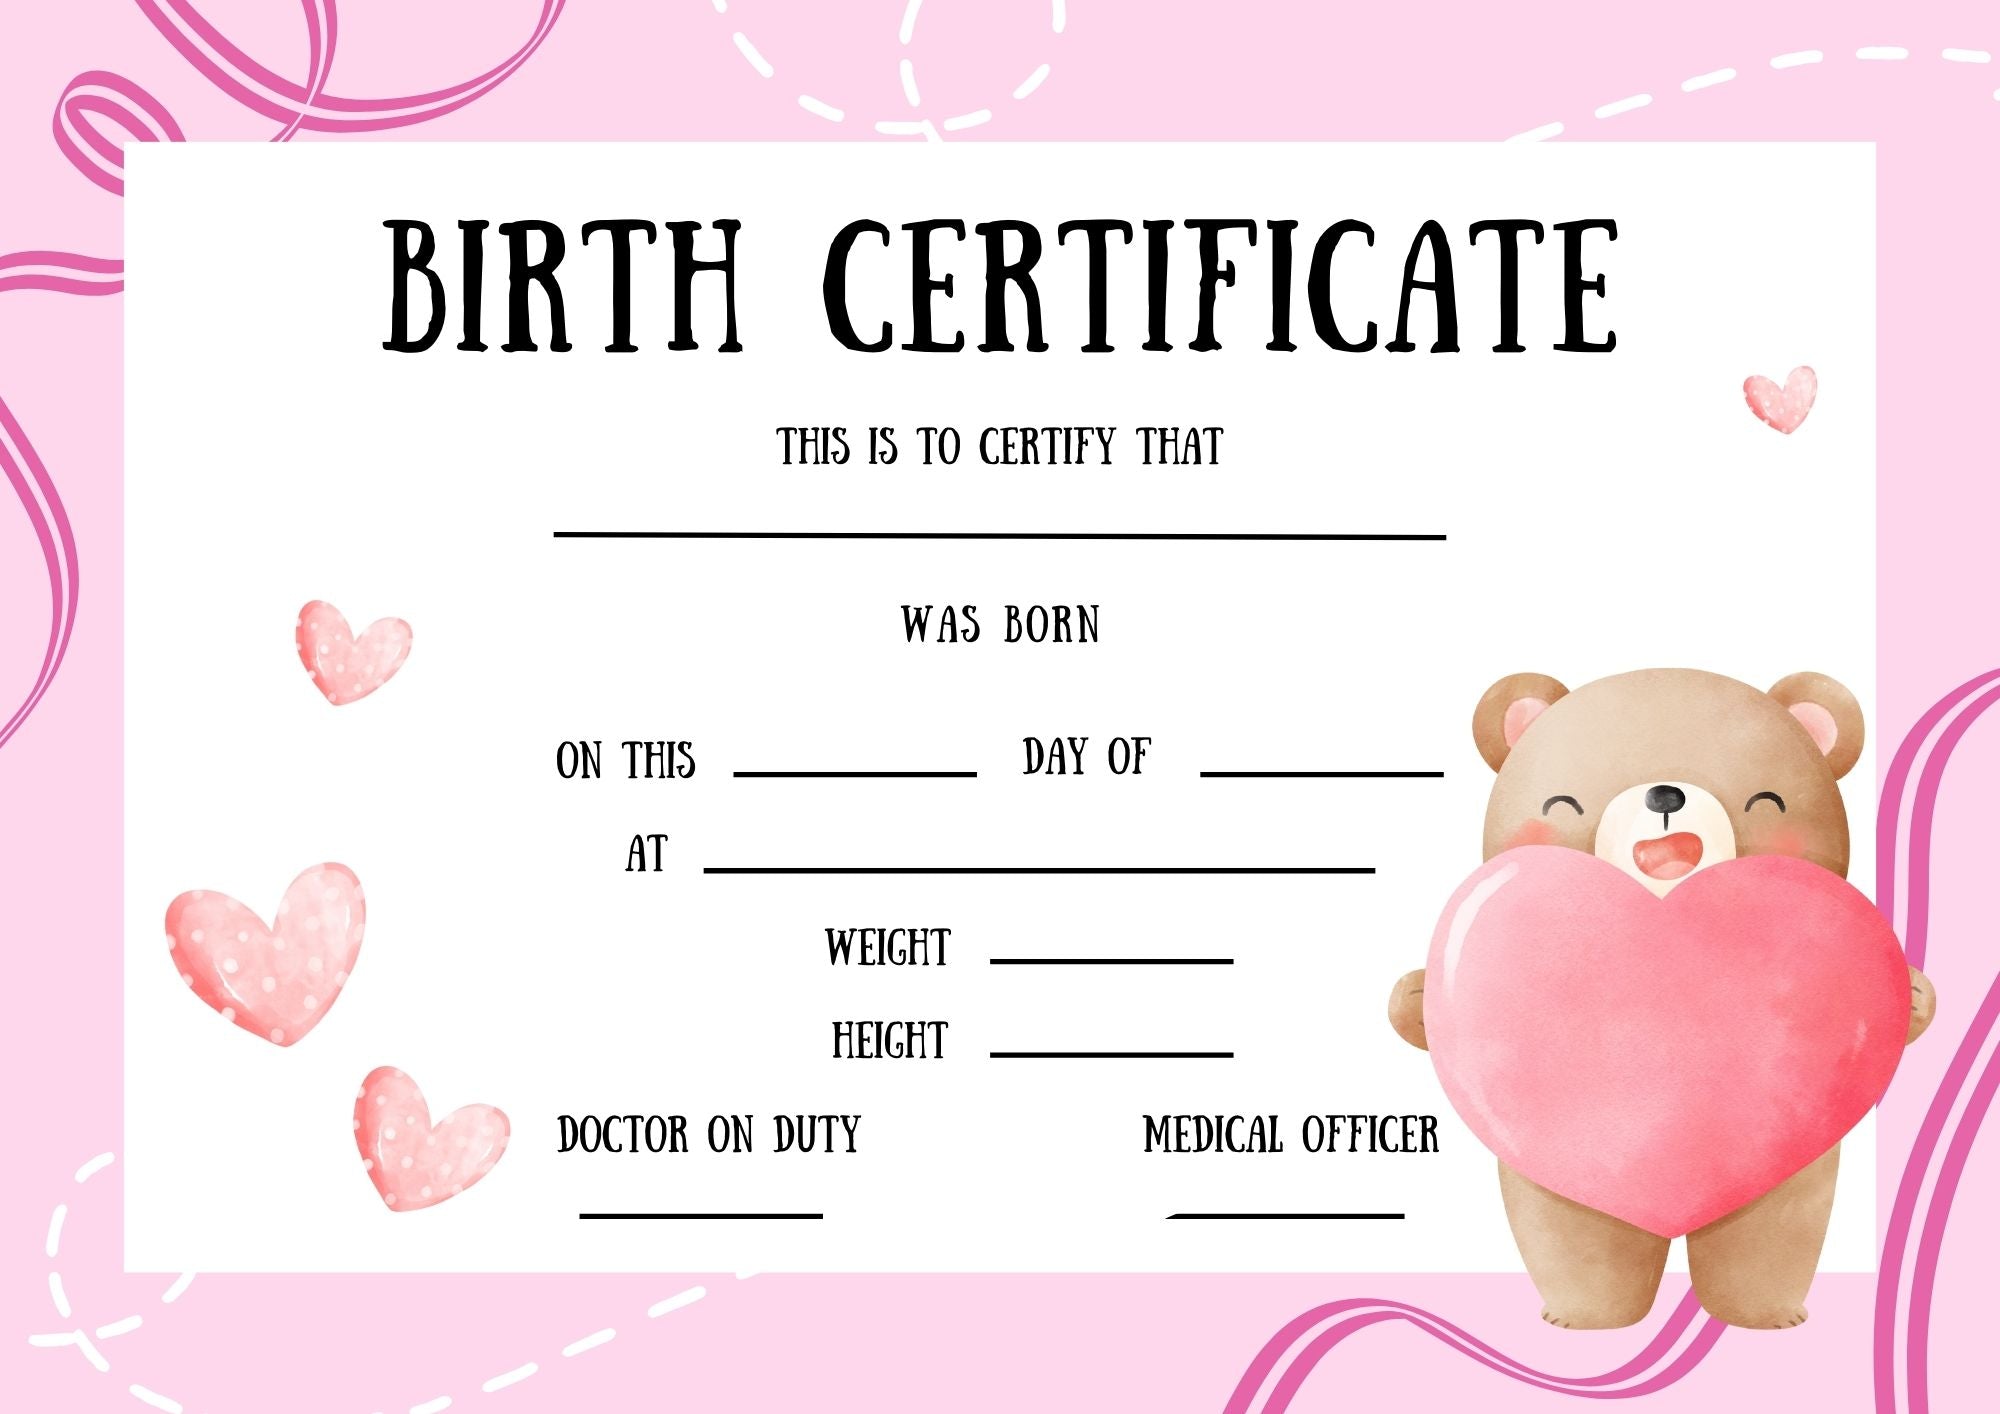 A cheerful and cute birth certificate template featuring the Joshua Bear from The Teddy Factory holding a heart, adorned with pink hearts and playful lines on a white and pink background.